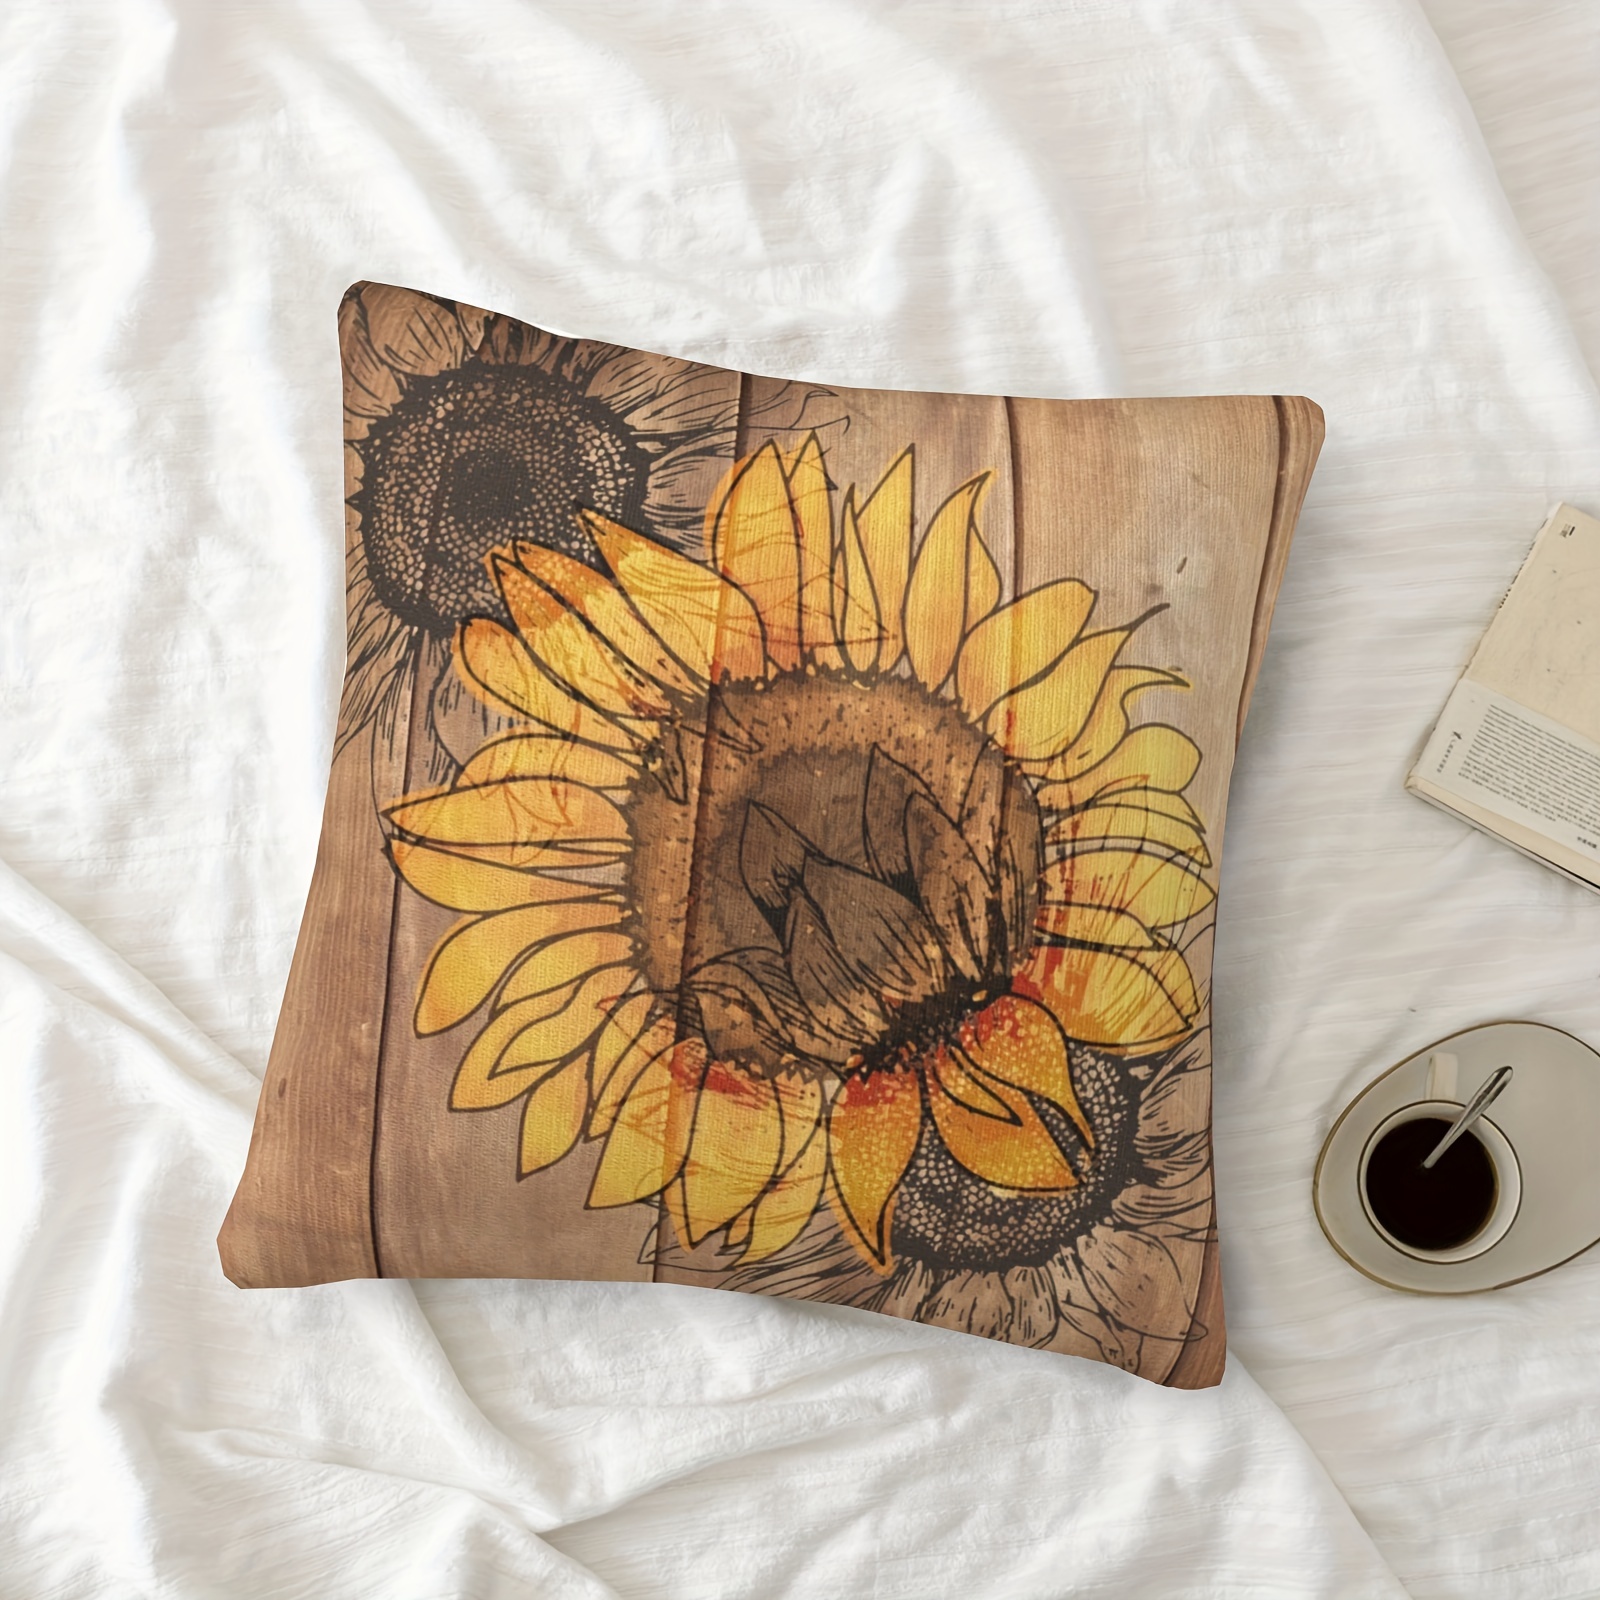 Set of 4 Pillow Covers 18x18, Country Sunflowers Farmhouse Cotton Linen  Fabric, Retro Yellow Flower with